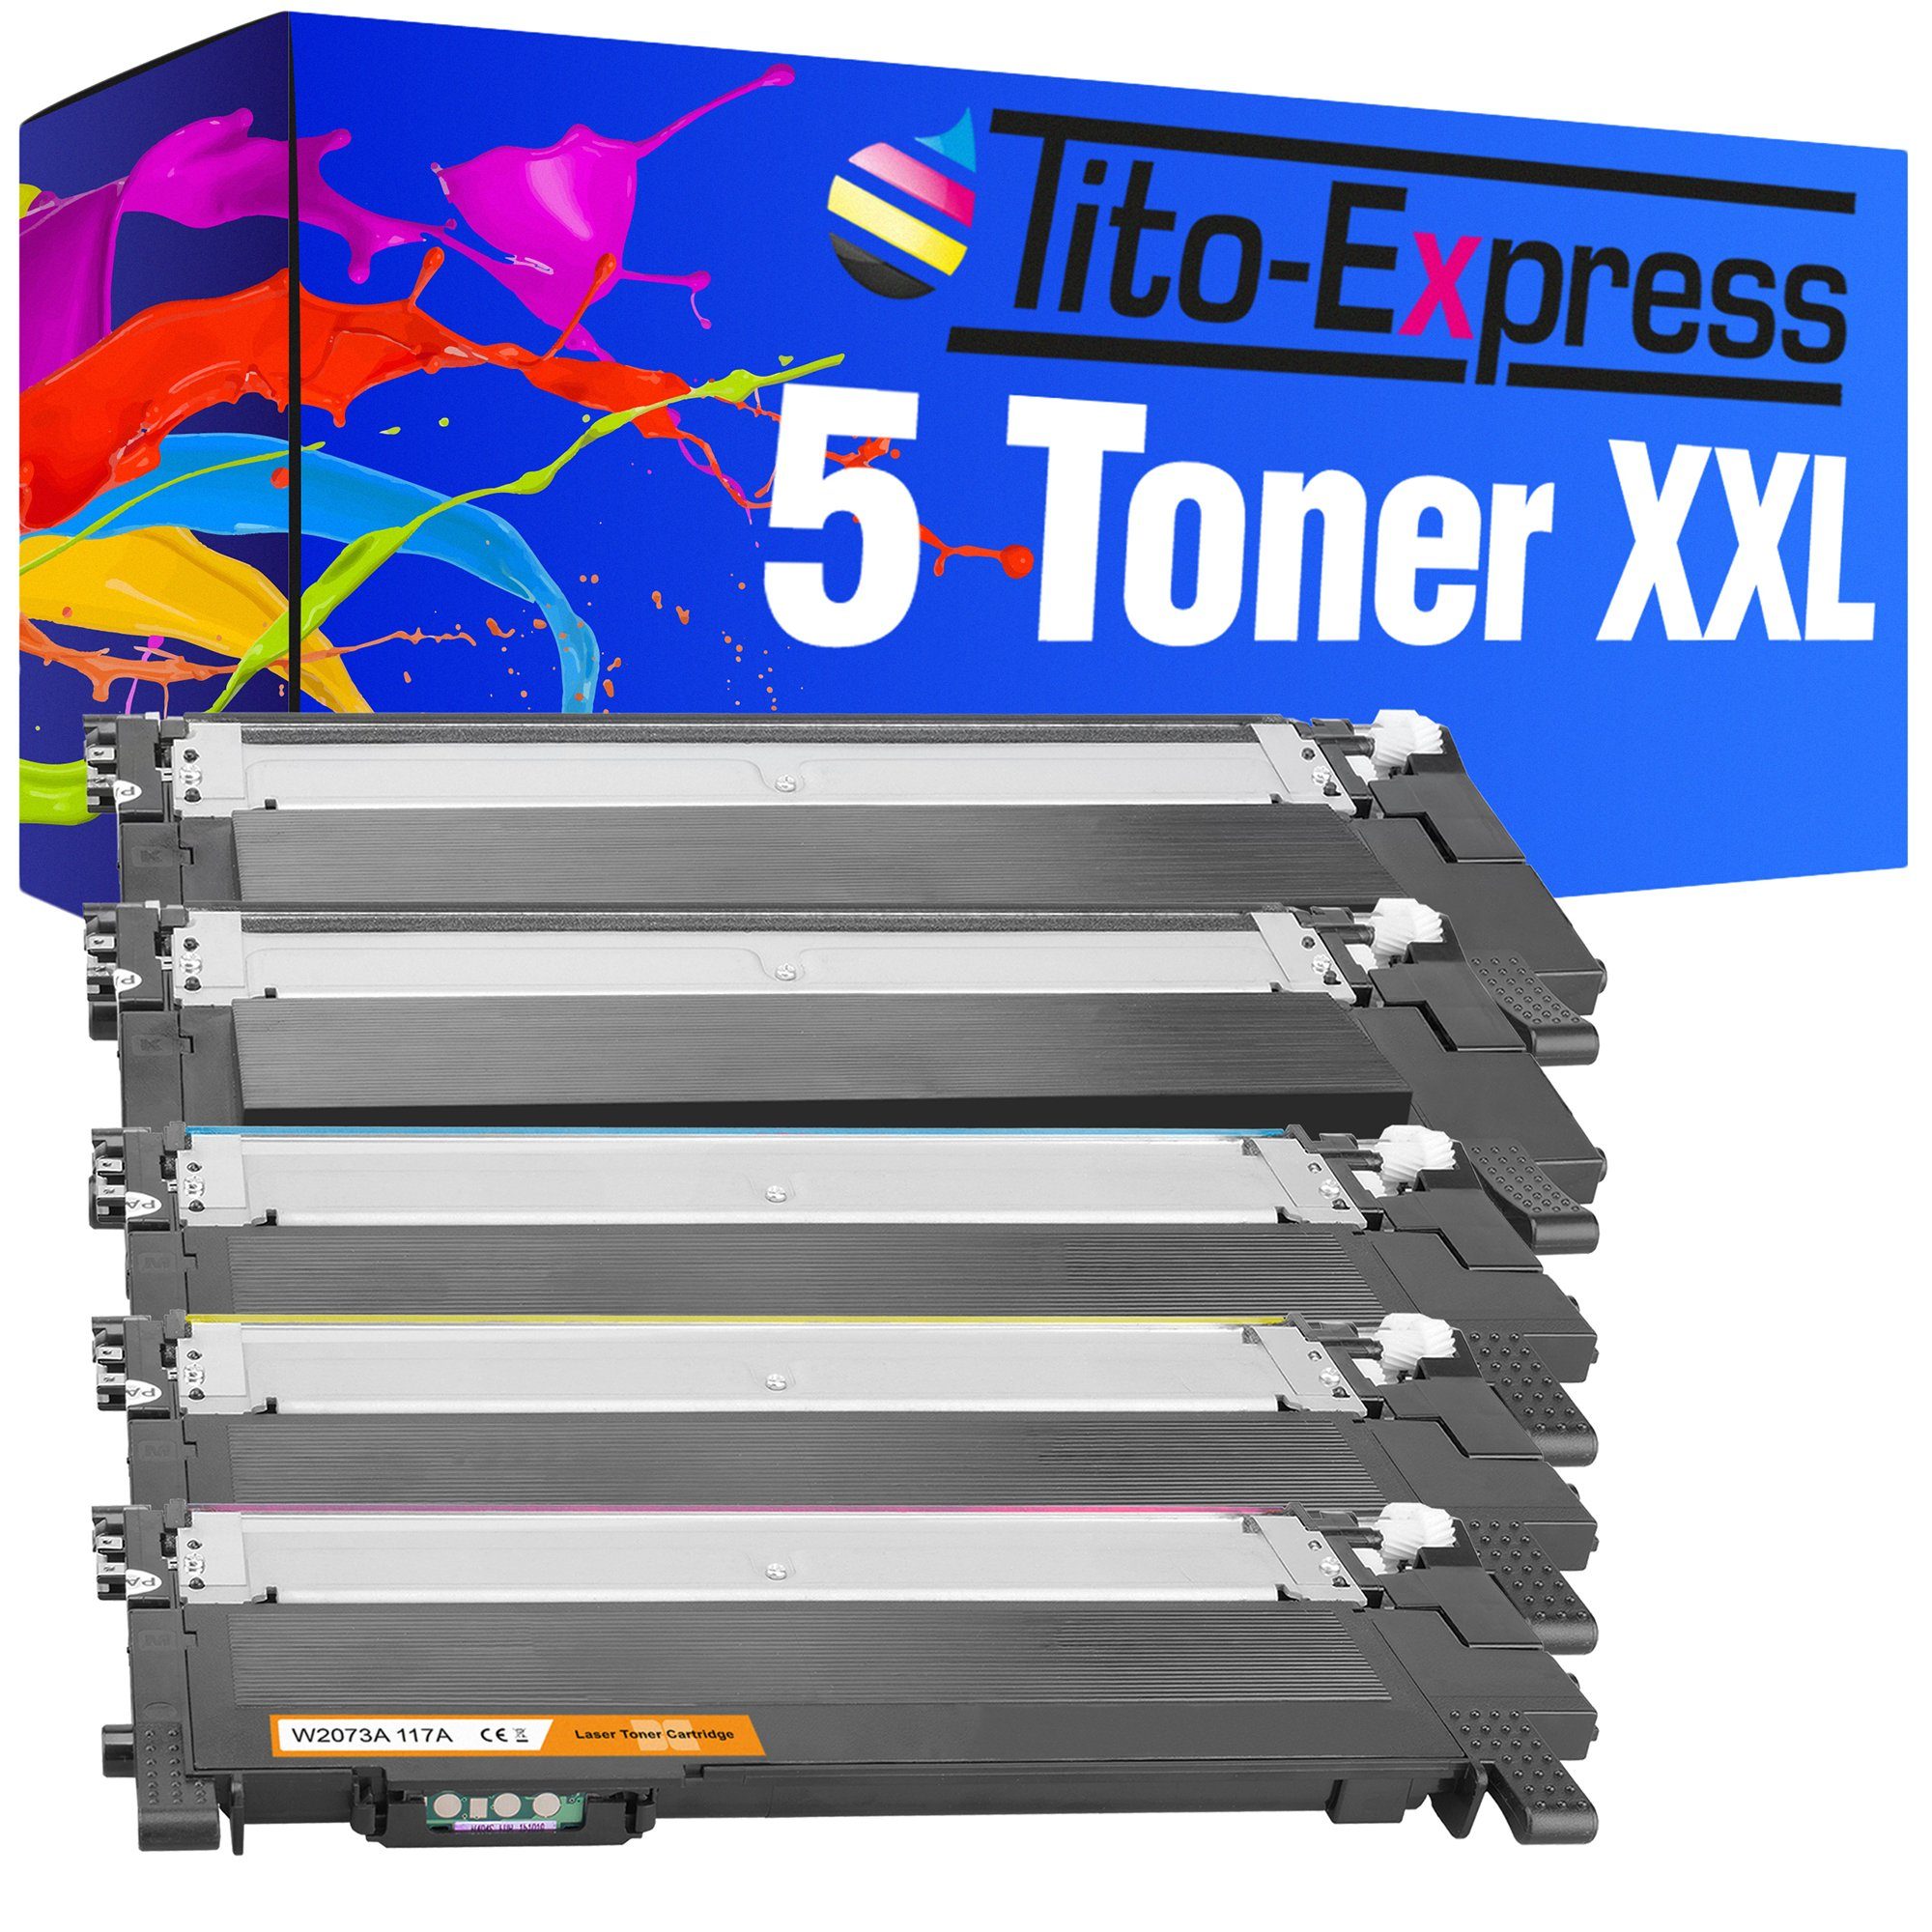 Tito-Express Tonerpatrone 5er Set Color W2072A Laser HP 1x 178nwg Magenta, 150a HP 2x (Multipack, Yellow), MFP 150nw 1x 179fnw 117A, W2071A für Black, 179fwg 178nw W2073A W2070A MFP-170 Cyan, 1x ersetzt